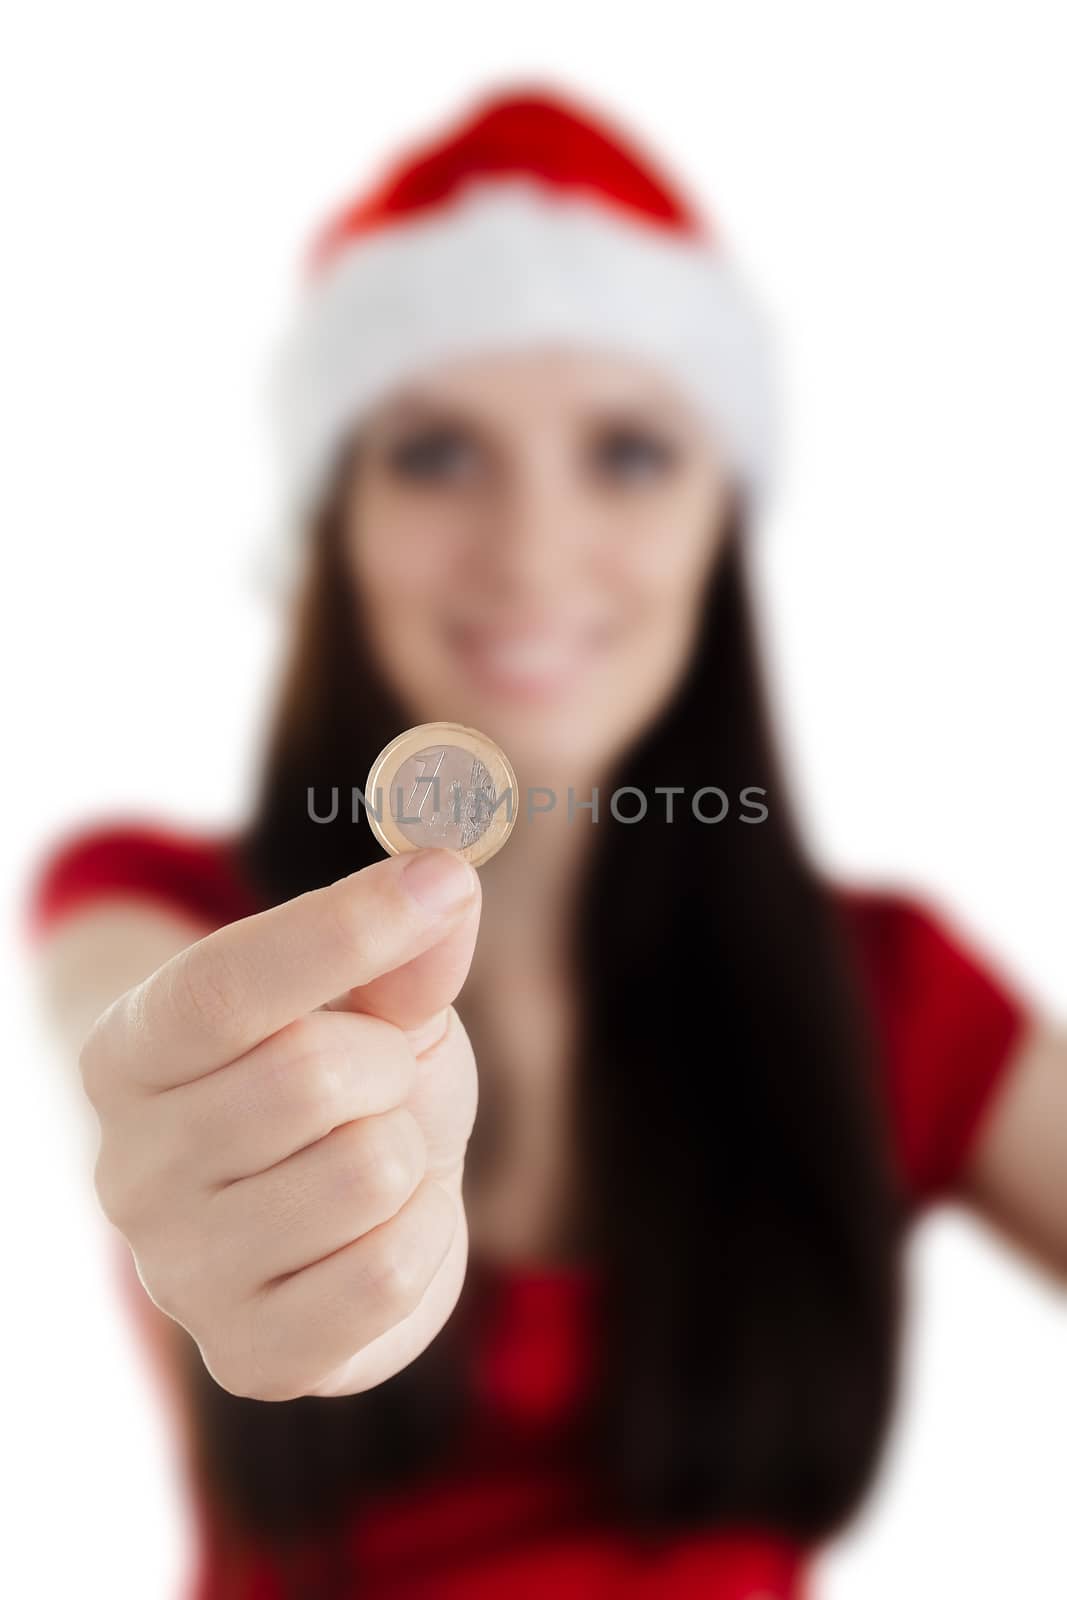 Young woman in Christmas costume on white background.